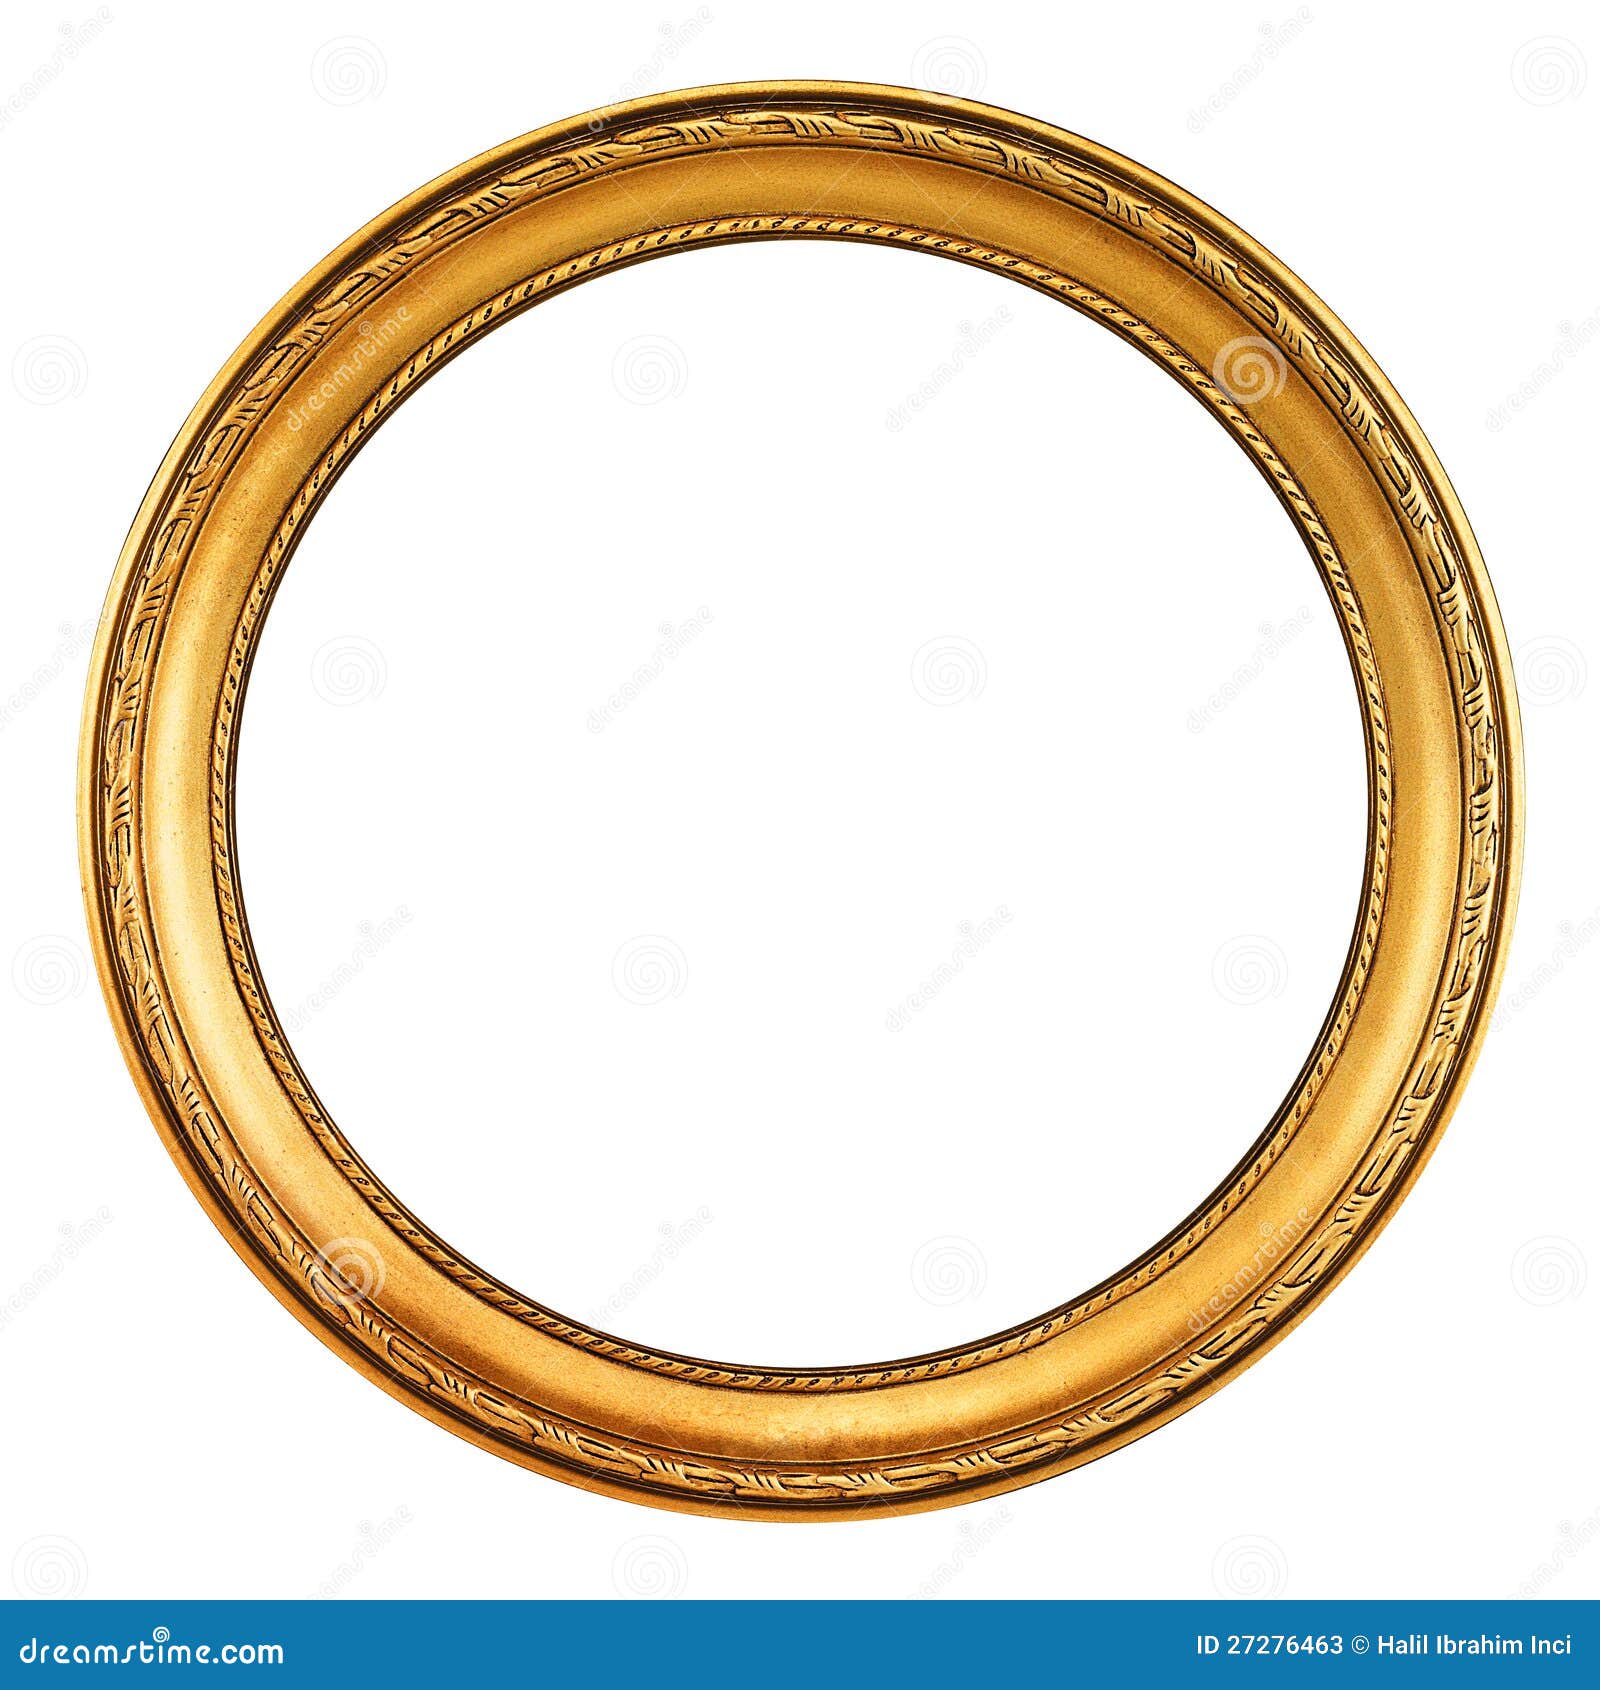 gold picture frame - clipping path